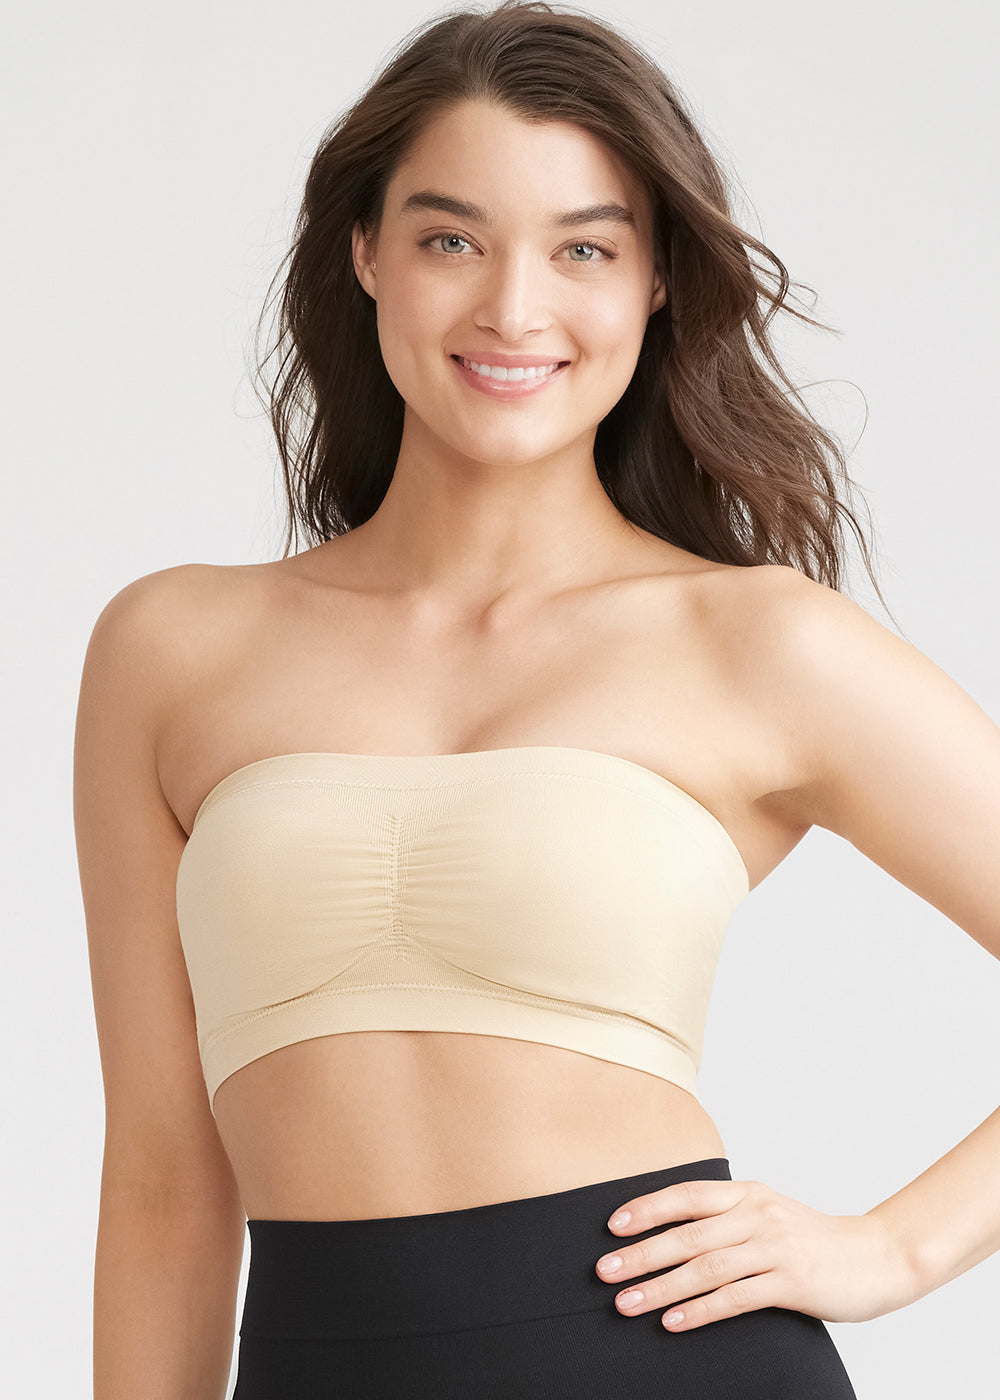 EGG CUPS S2: STRAPLESS BRA – Covers a Multitude ®